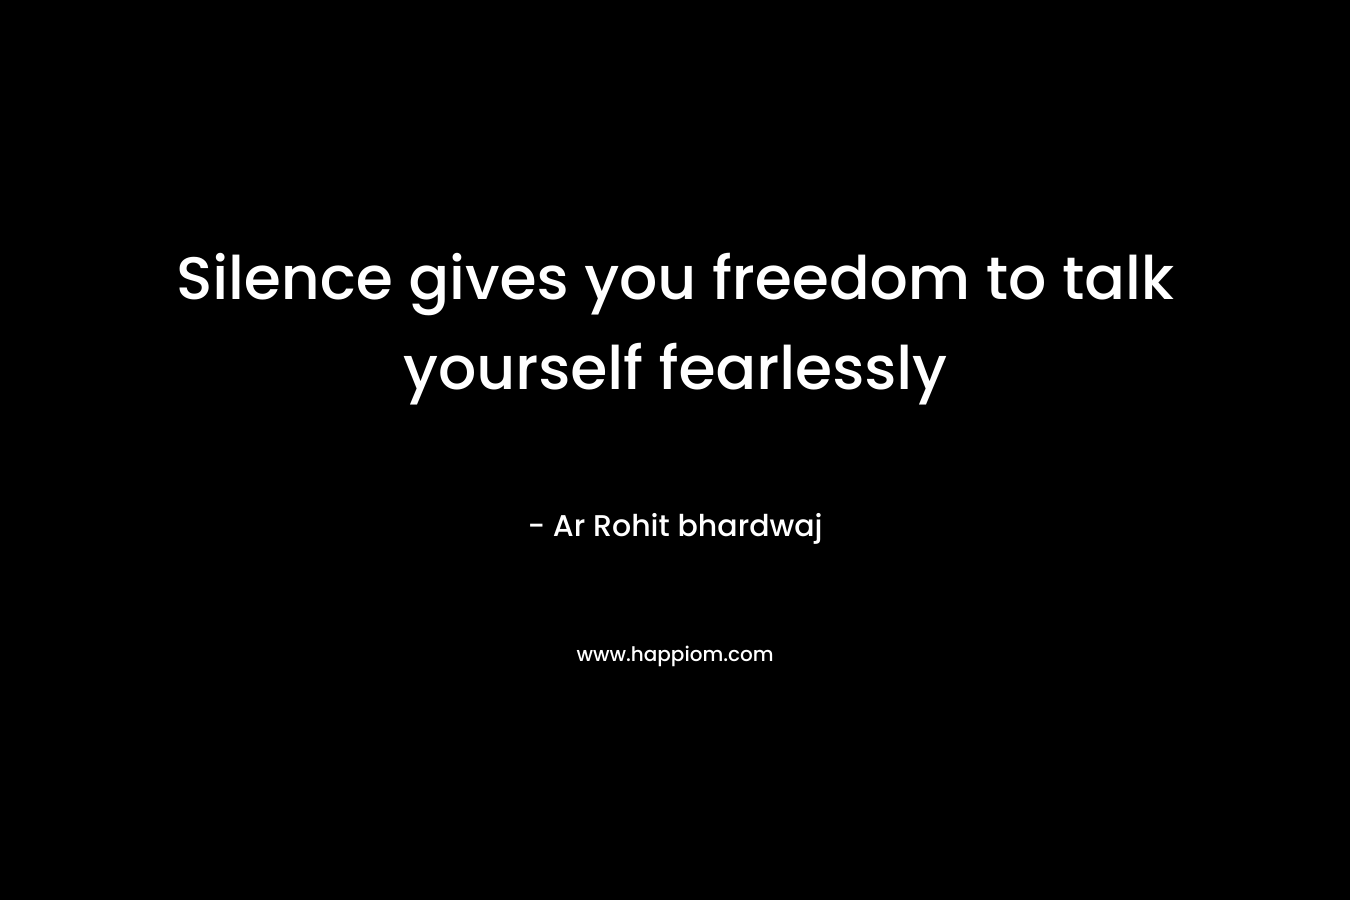 Silence gives you freedom to talk yourself fearlessly